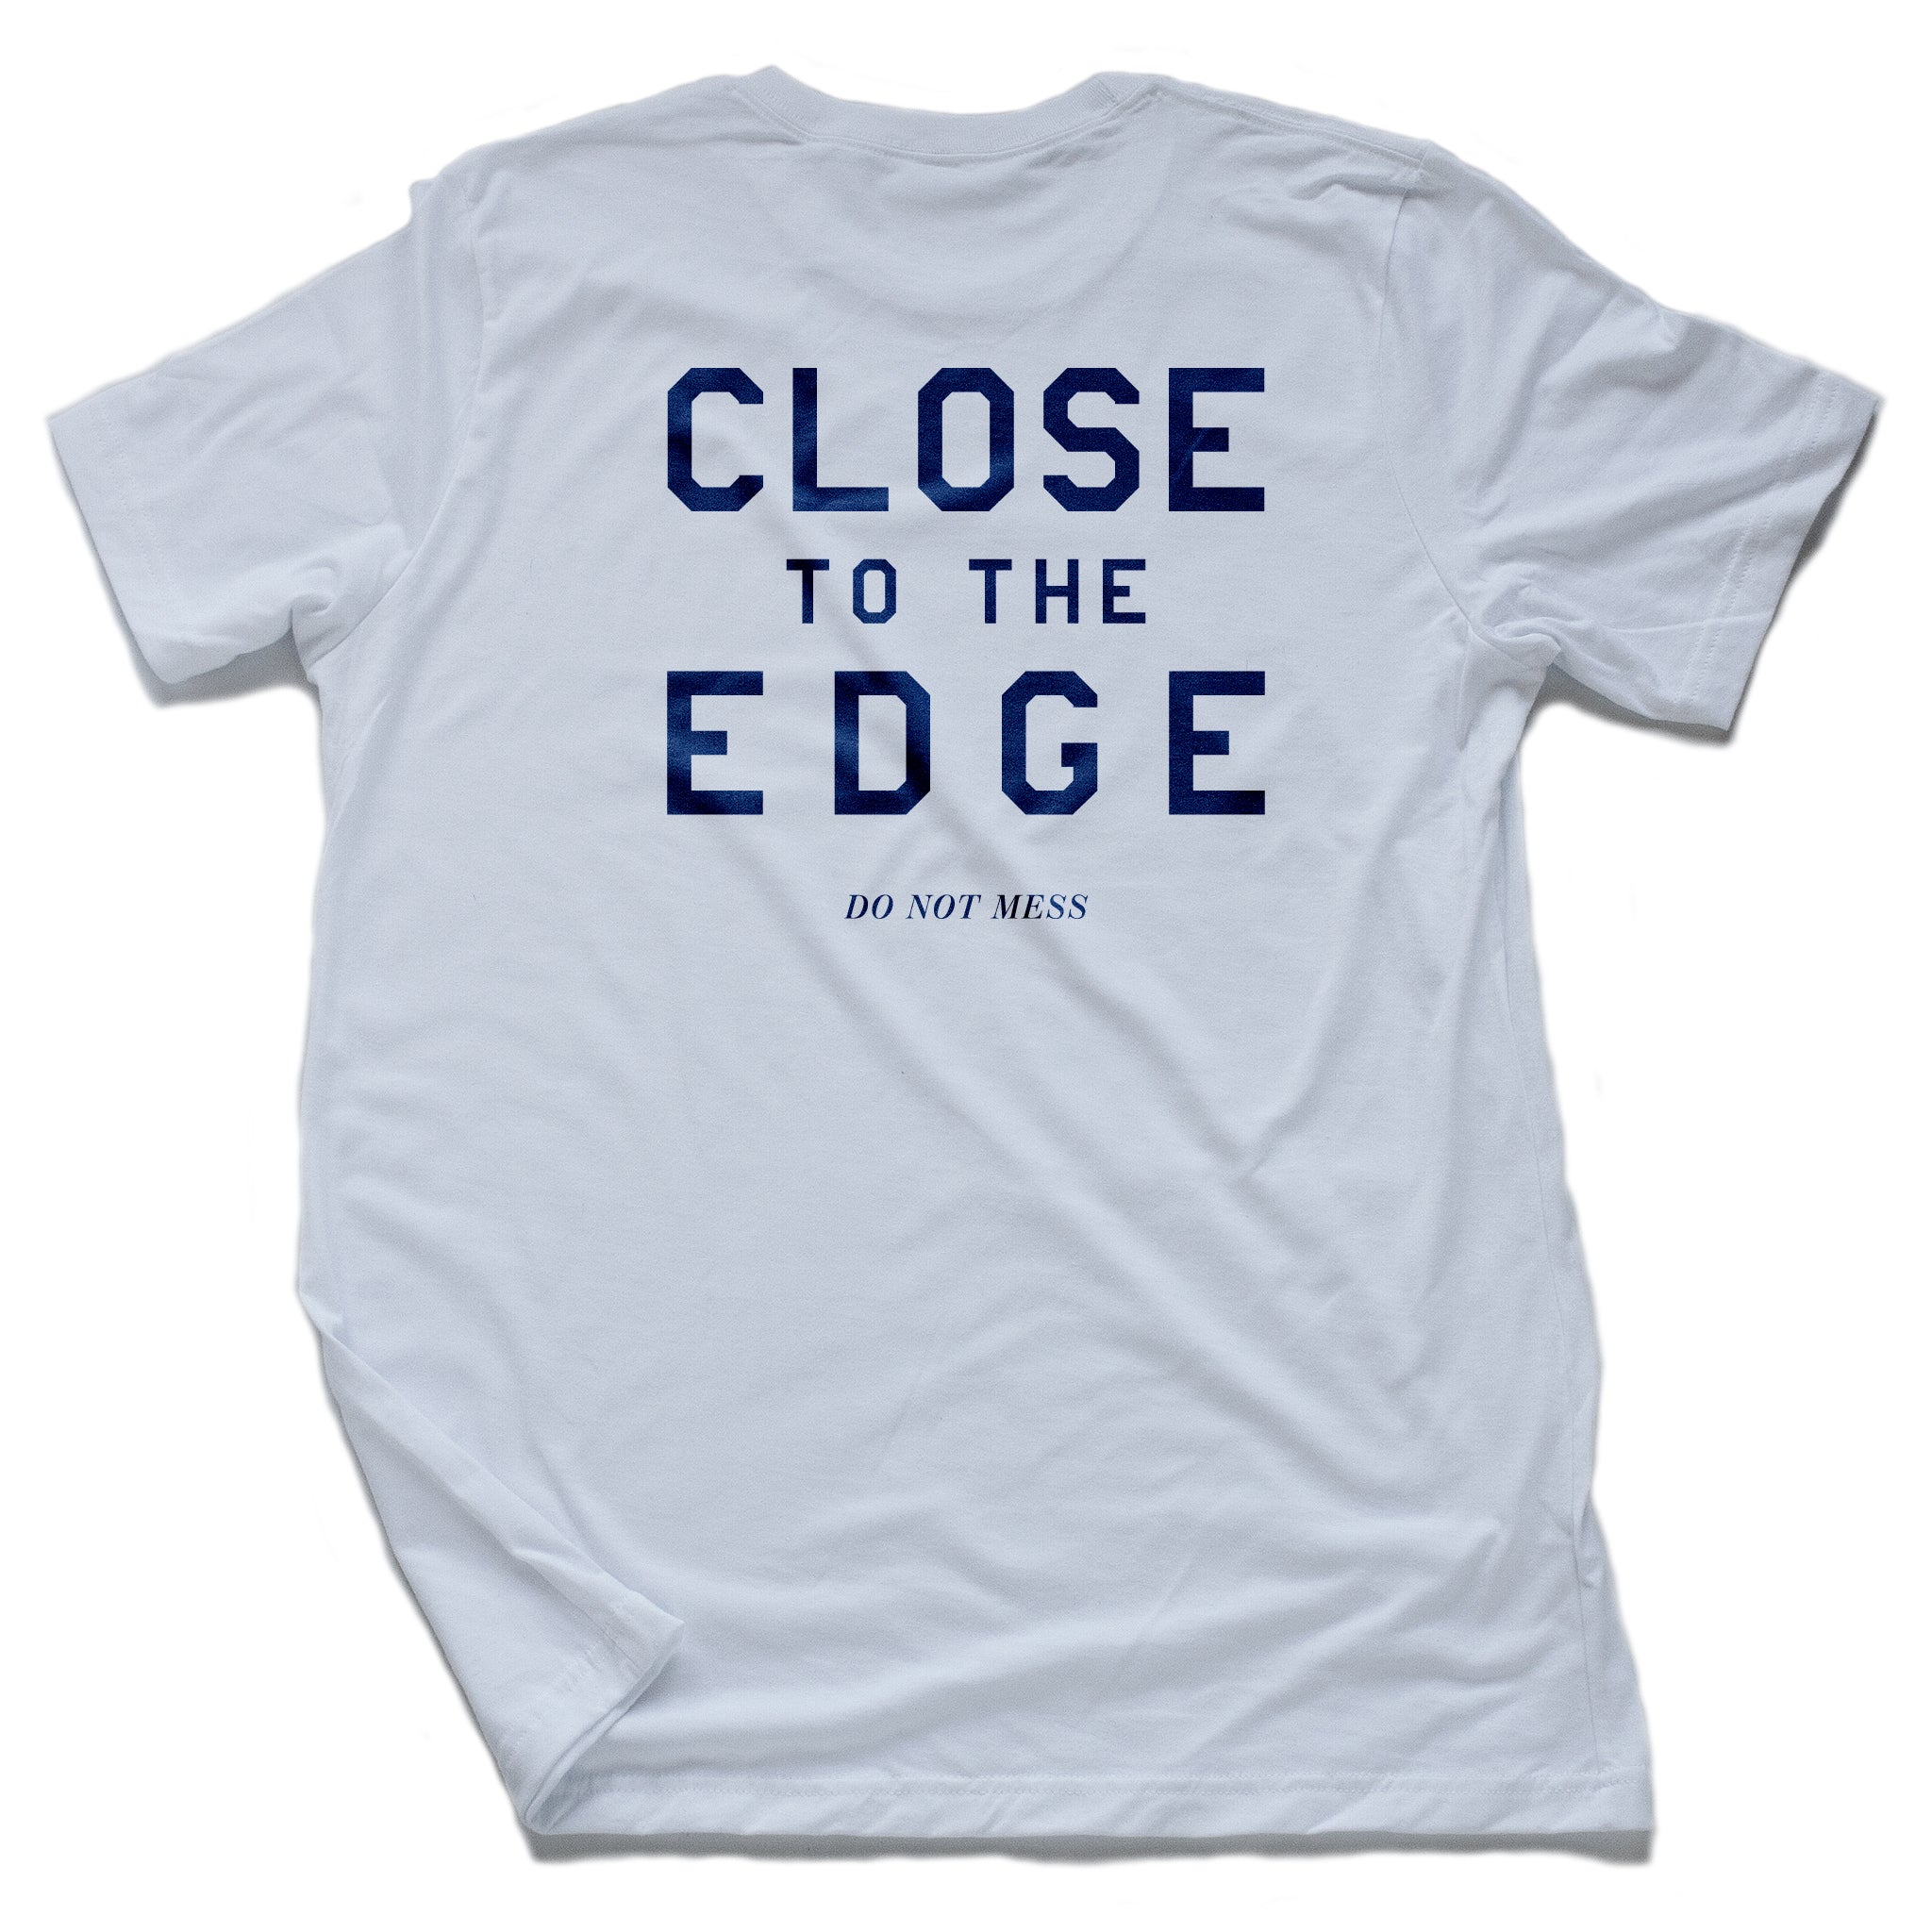 A bold graphic t-shirt in white, with classic, retro typography “CLOSE TO THE EDGE” on the back. By the fashion brand YUF,  From wolfsaint.net